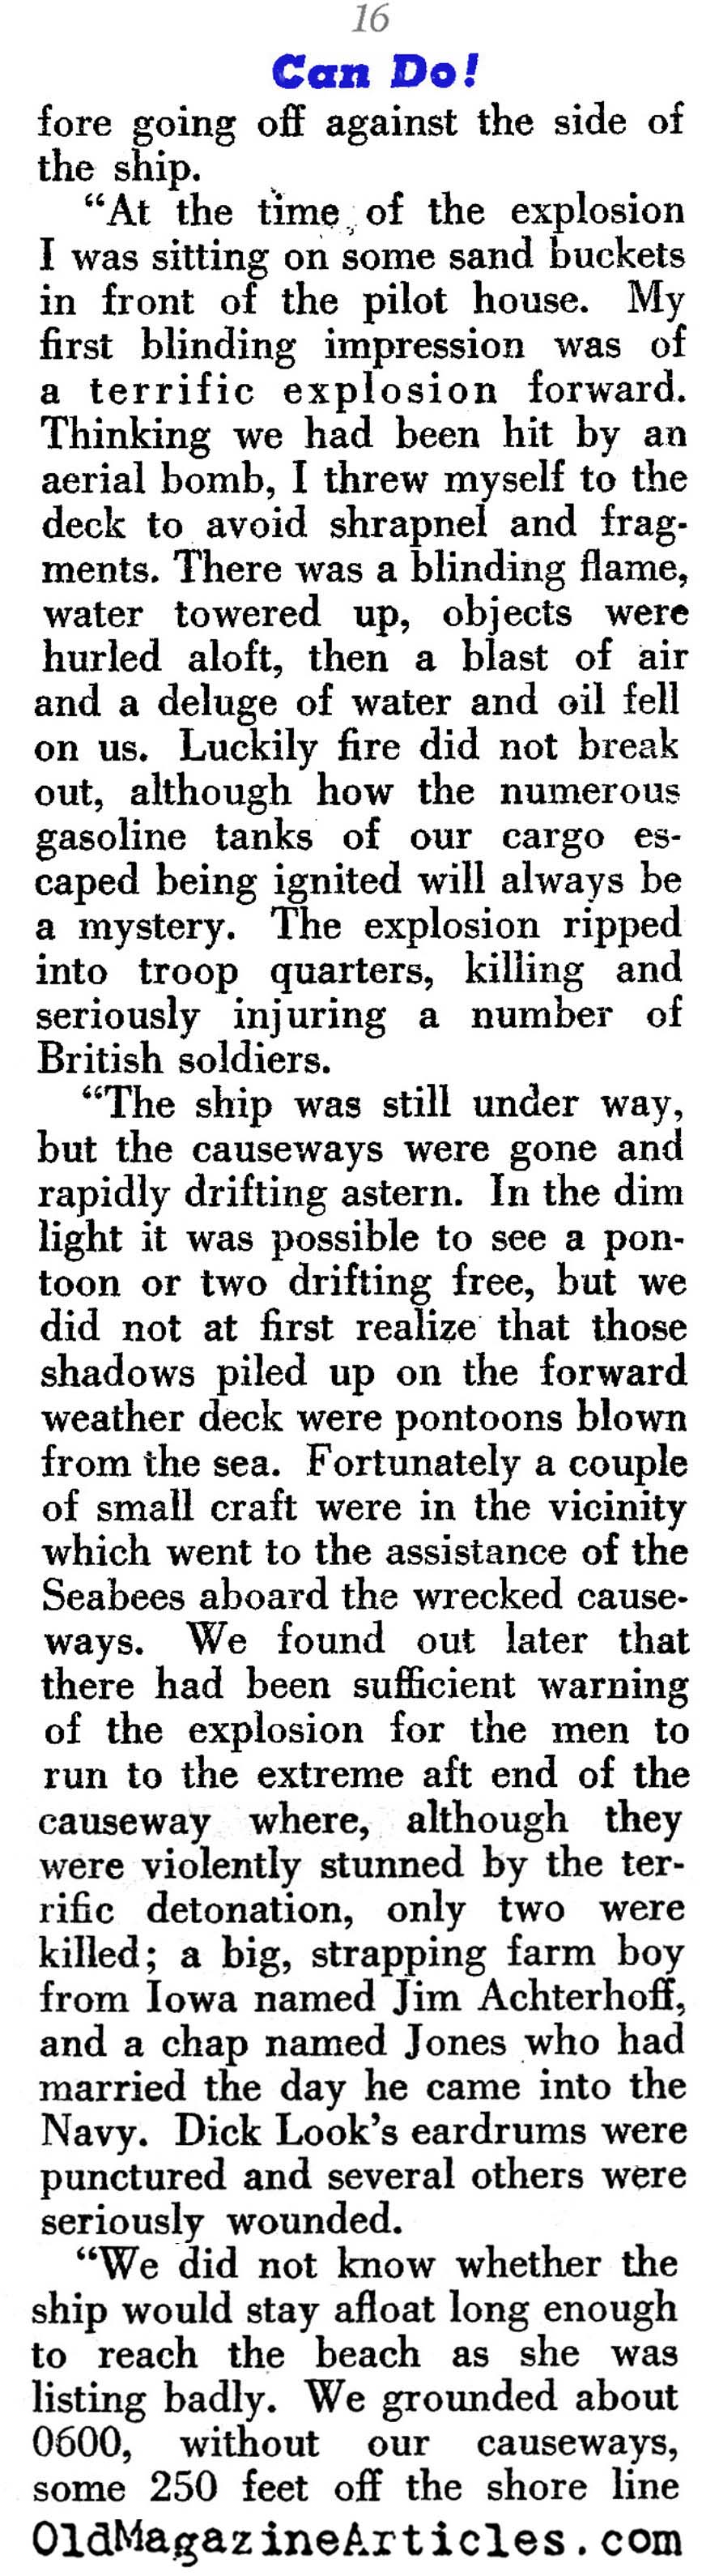 The Seabees (Pageant Magazine, 1944)